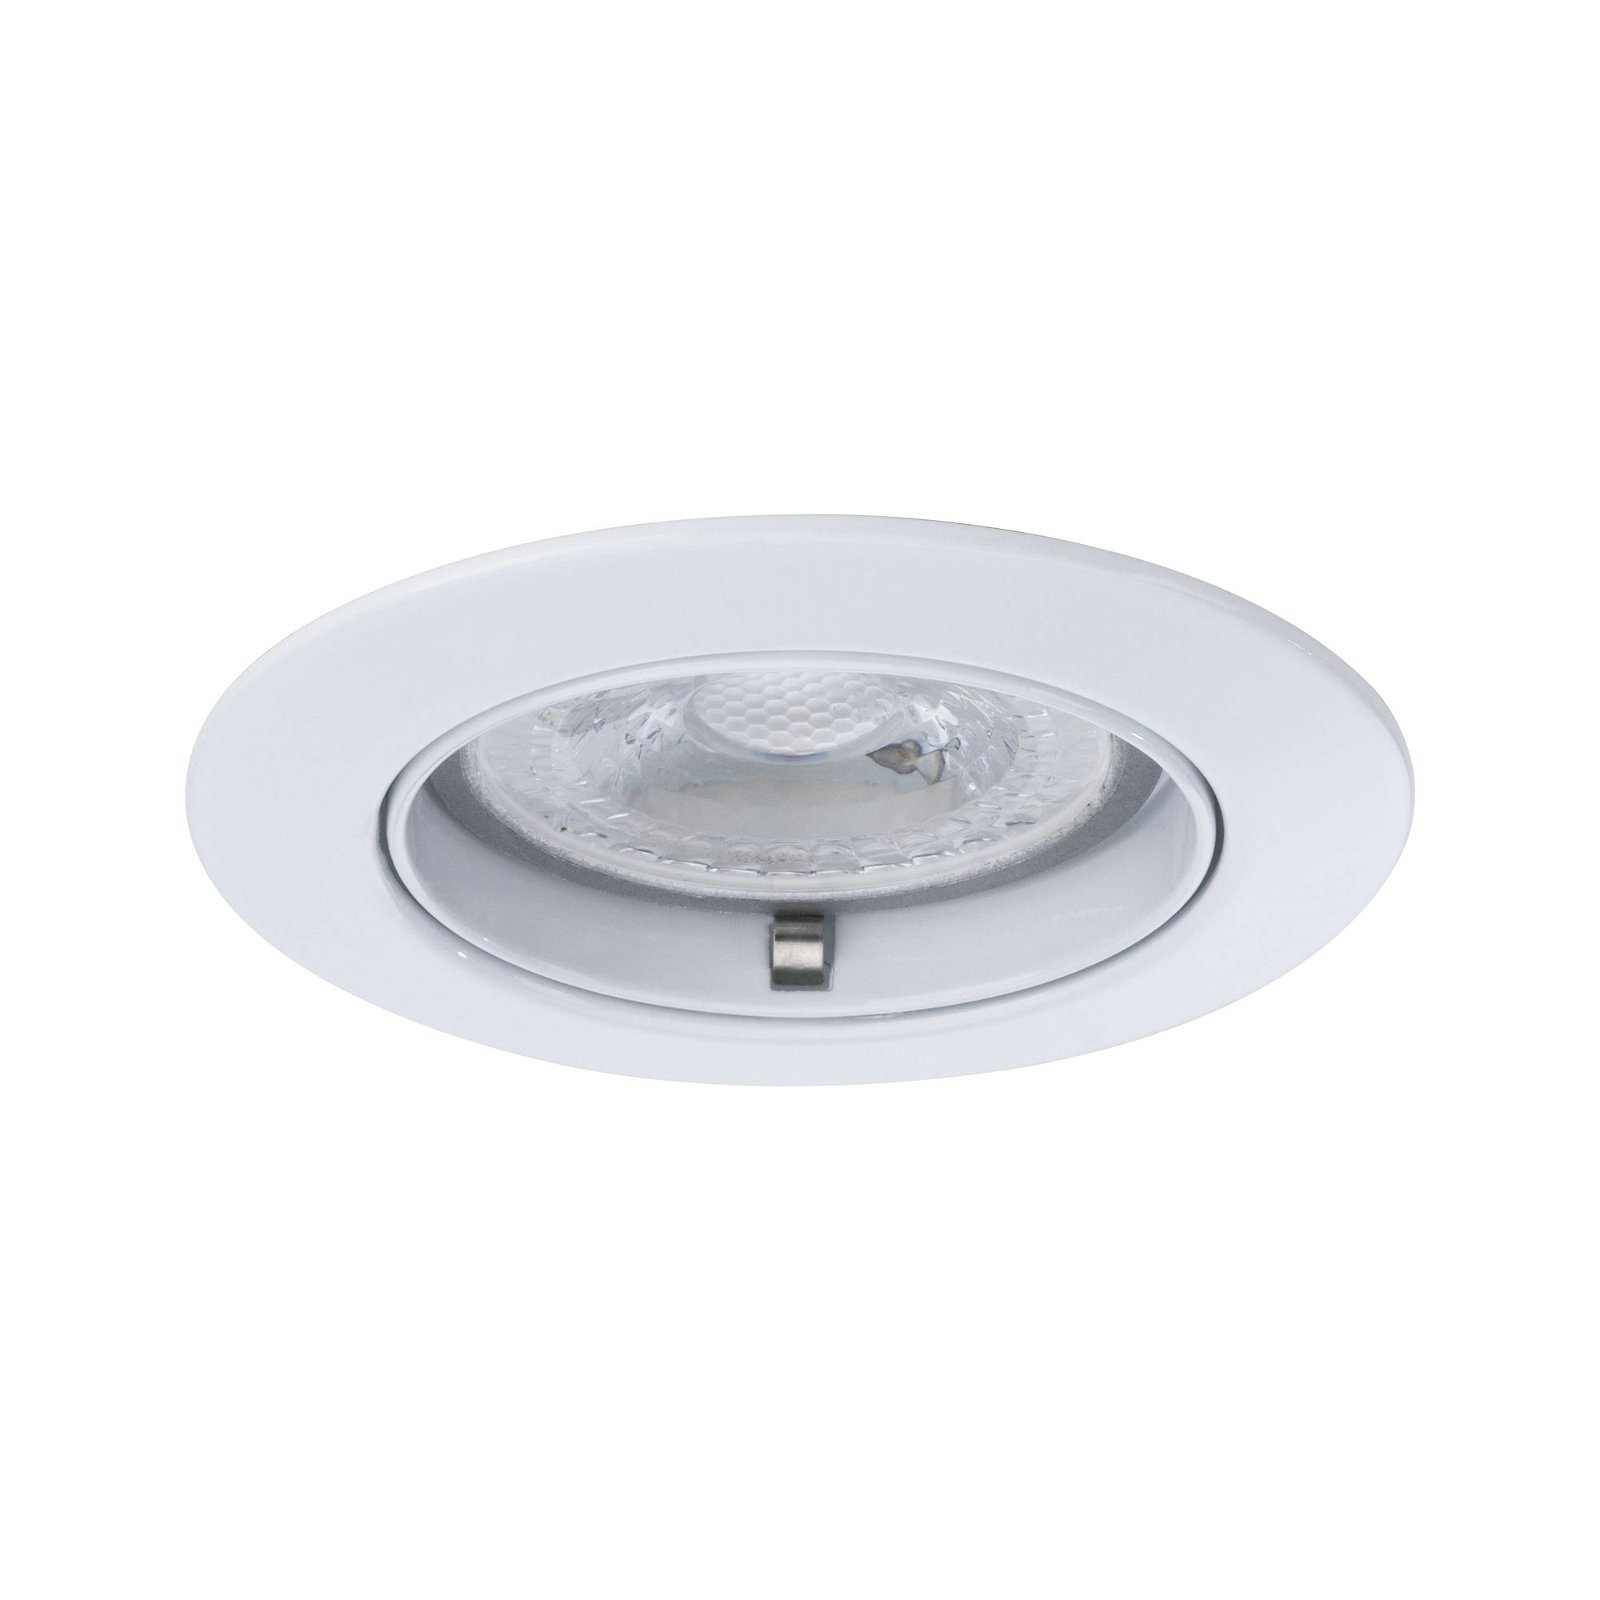 Premium Recessed luminaire easyClick2 round 83mm 30° GU10 max. 50W 230V dimmable White